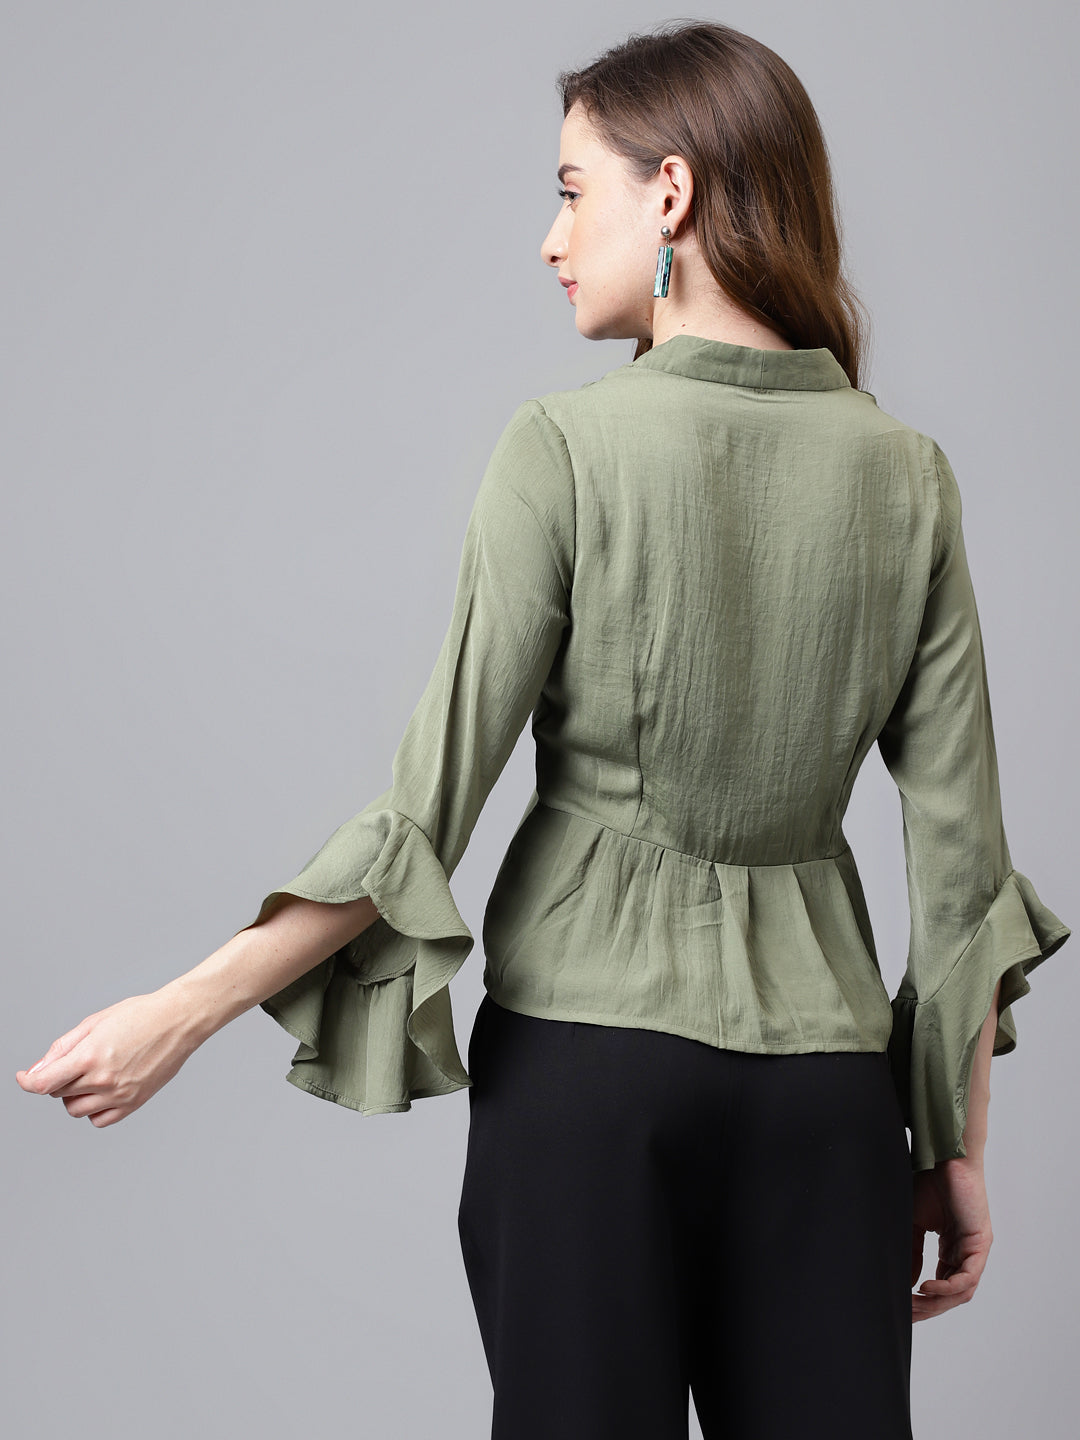 Green 3/4 Sleeve Solid Normal Blouse Top